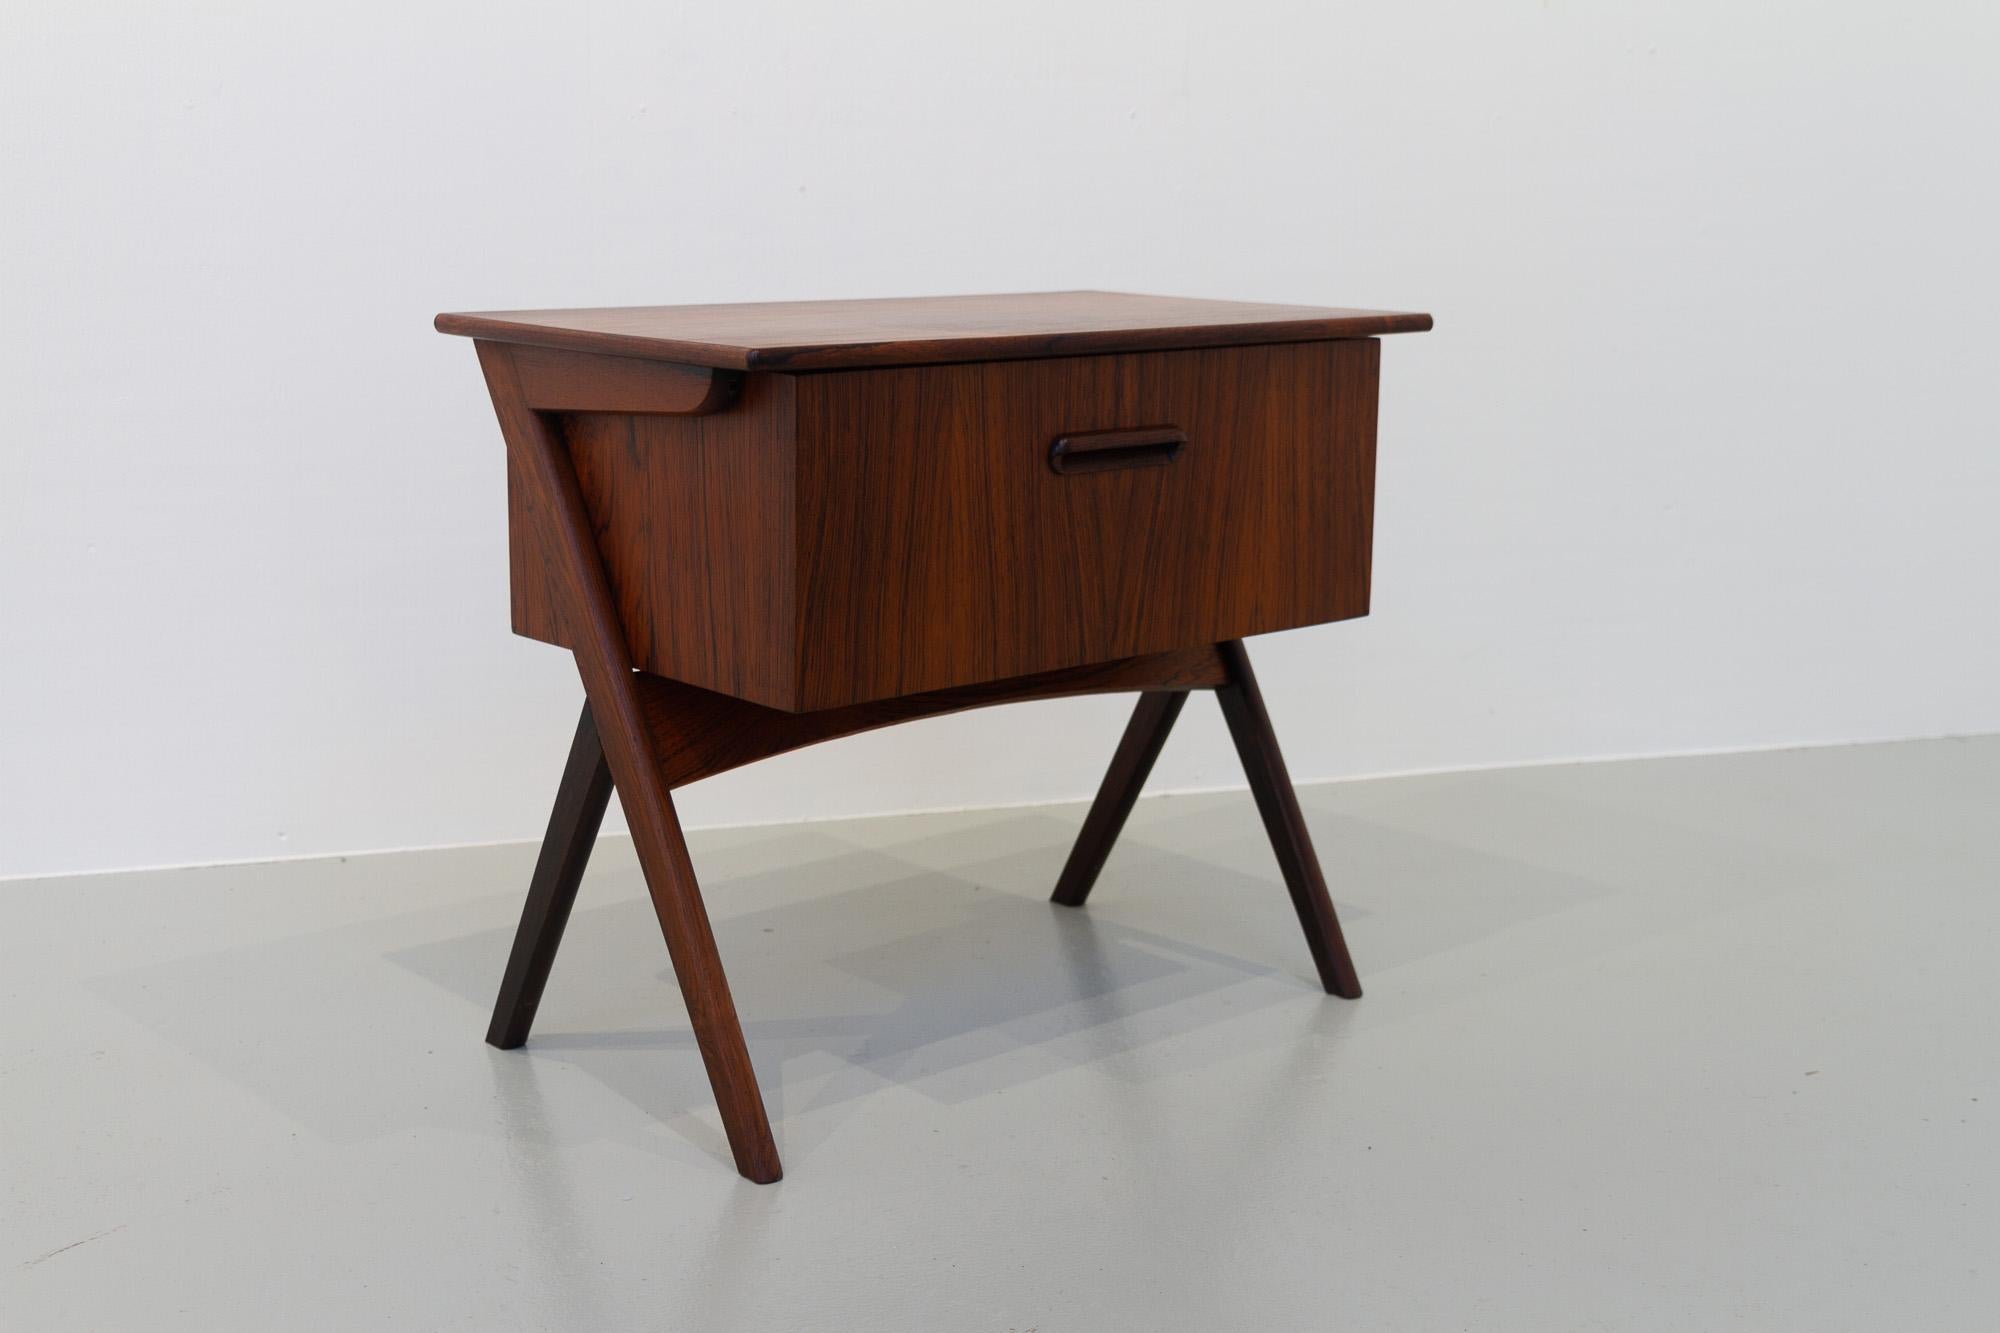 Vintage Danish Rosewood Sewing Table with Tilting Drawer, 1960s.
Elegant and versatile small table with scissor legs and pull out compartment in stunning rosewood veneer. Compartment contains two sliding trays.
Back in the 1960s sewing tables were